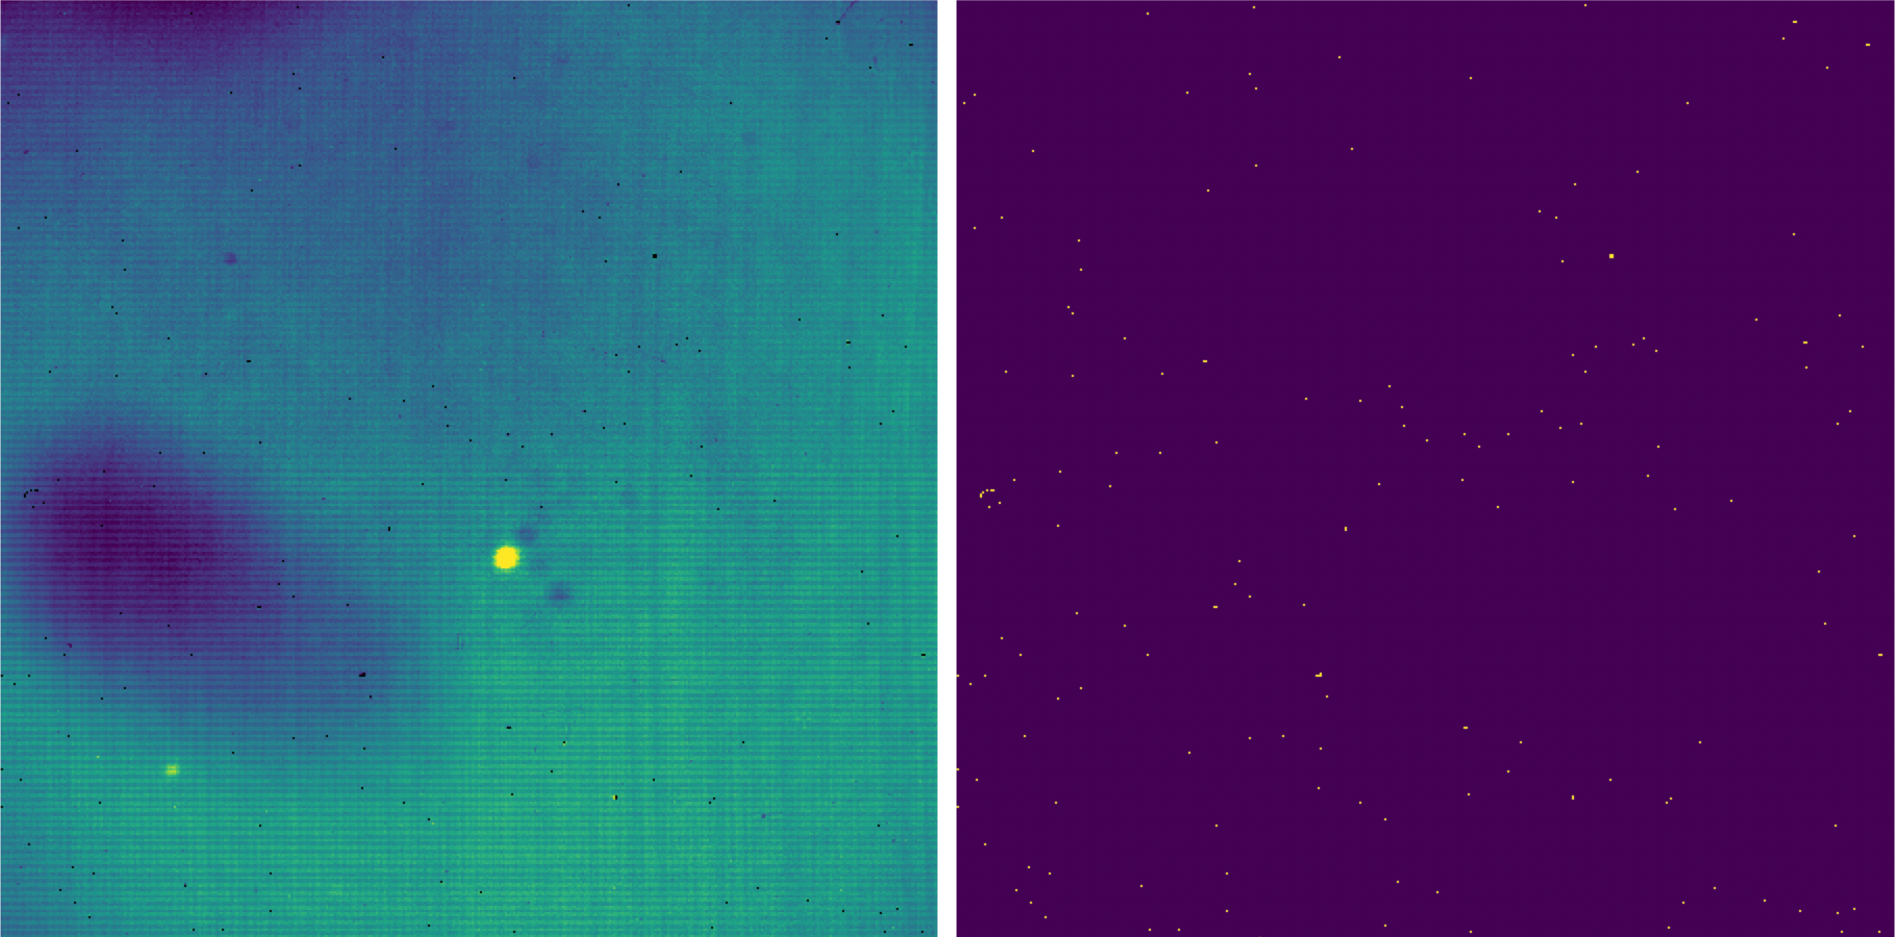 Left: a raw image clipped to the rectangular FOV. Right: a bad pixel mask identifying scattered bad pixels.